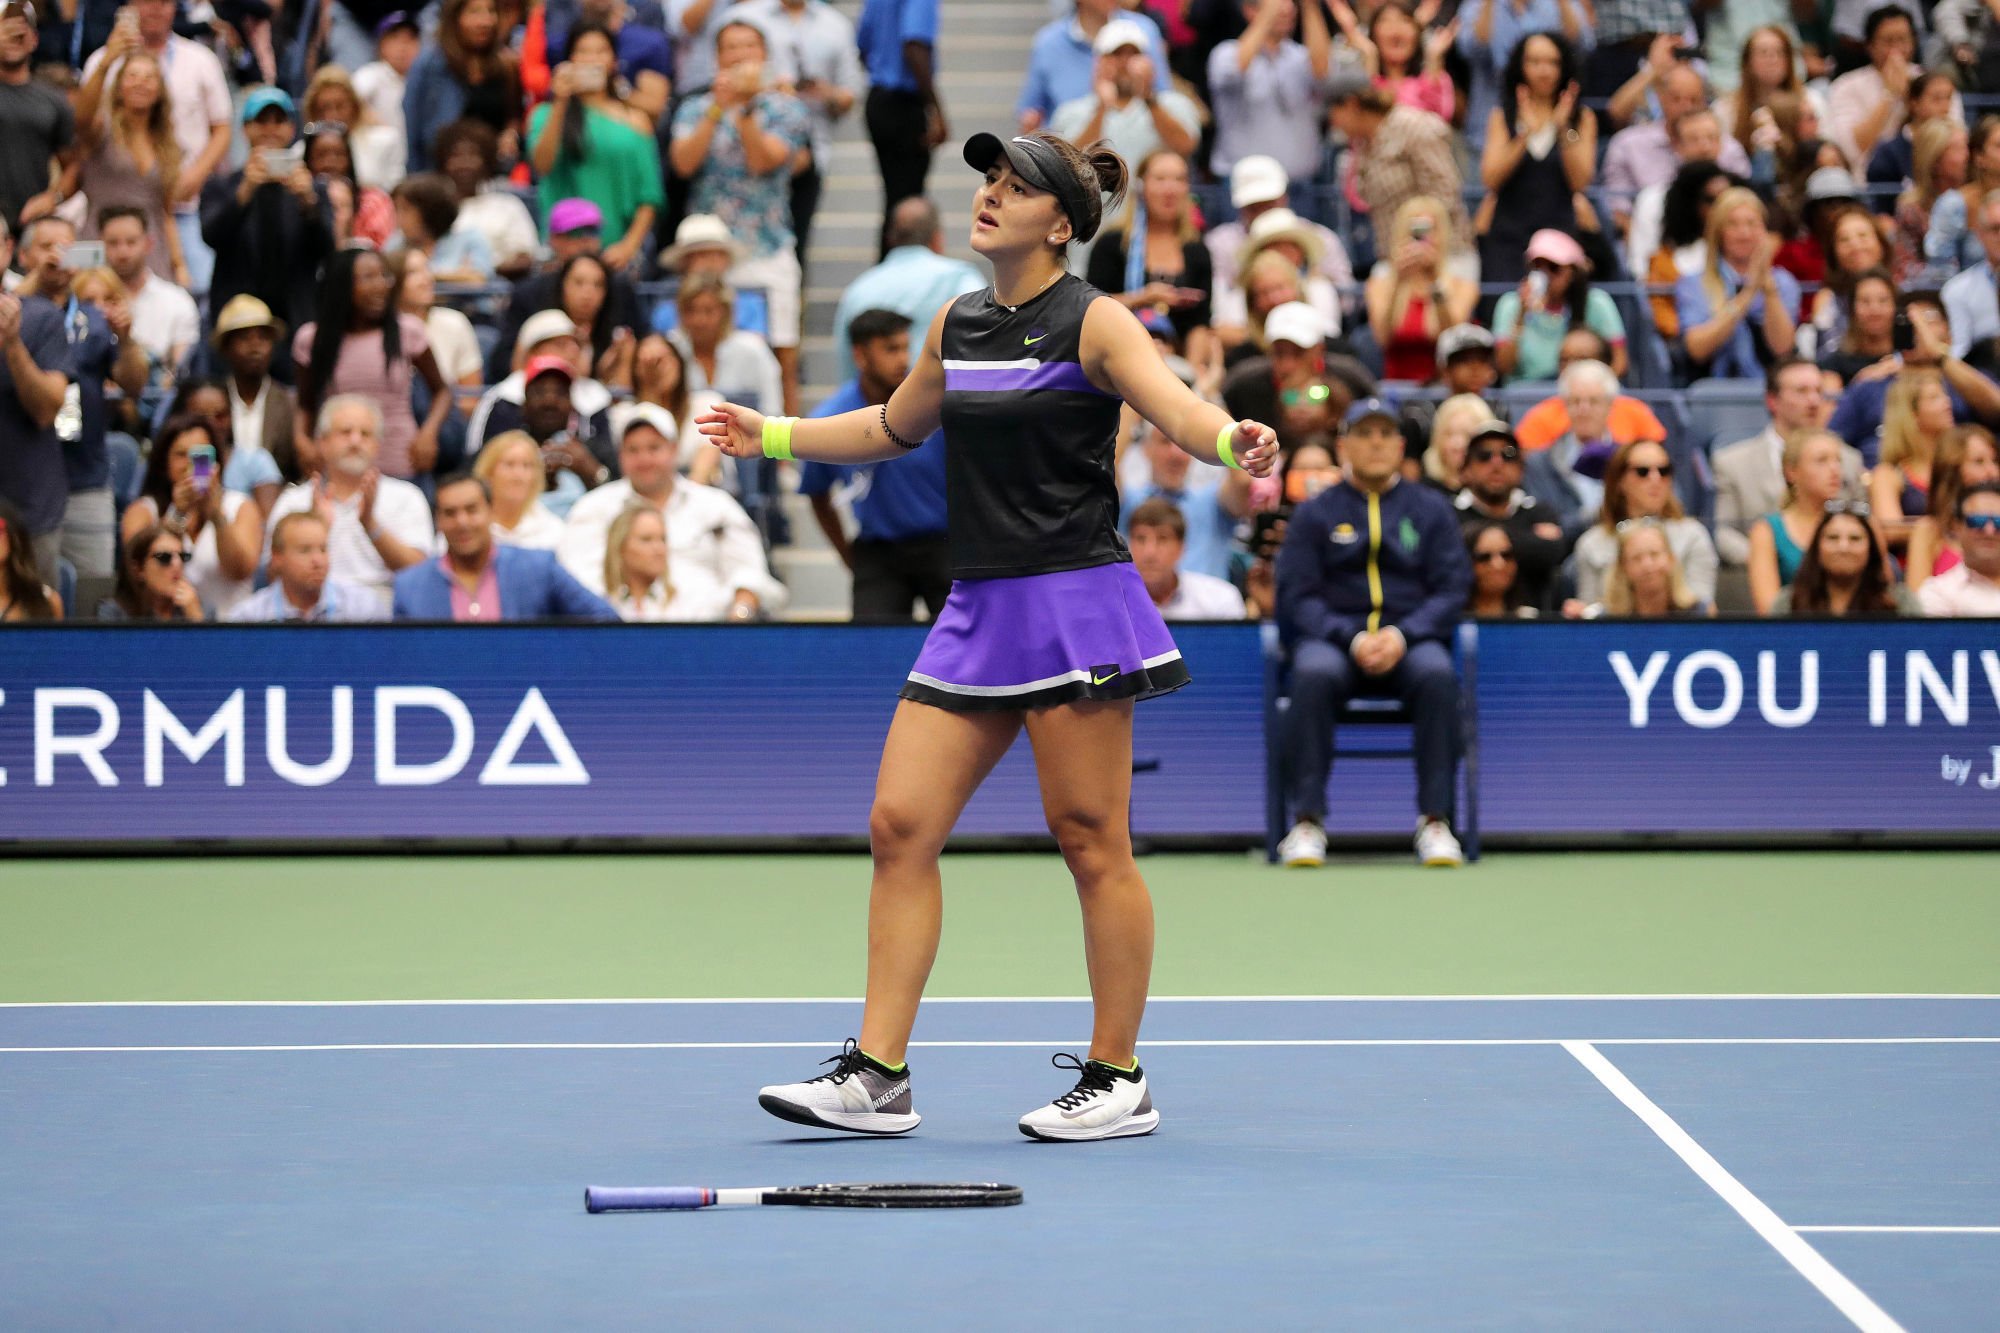 Bianca Andreescu of Canada during the Women's Final US Open on September 7, 2019 in New York City. (Photo by Marek Janikowski/Icon Sport) - Bianca ANDREESCU